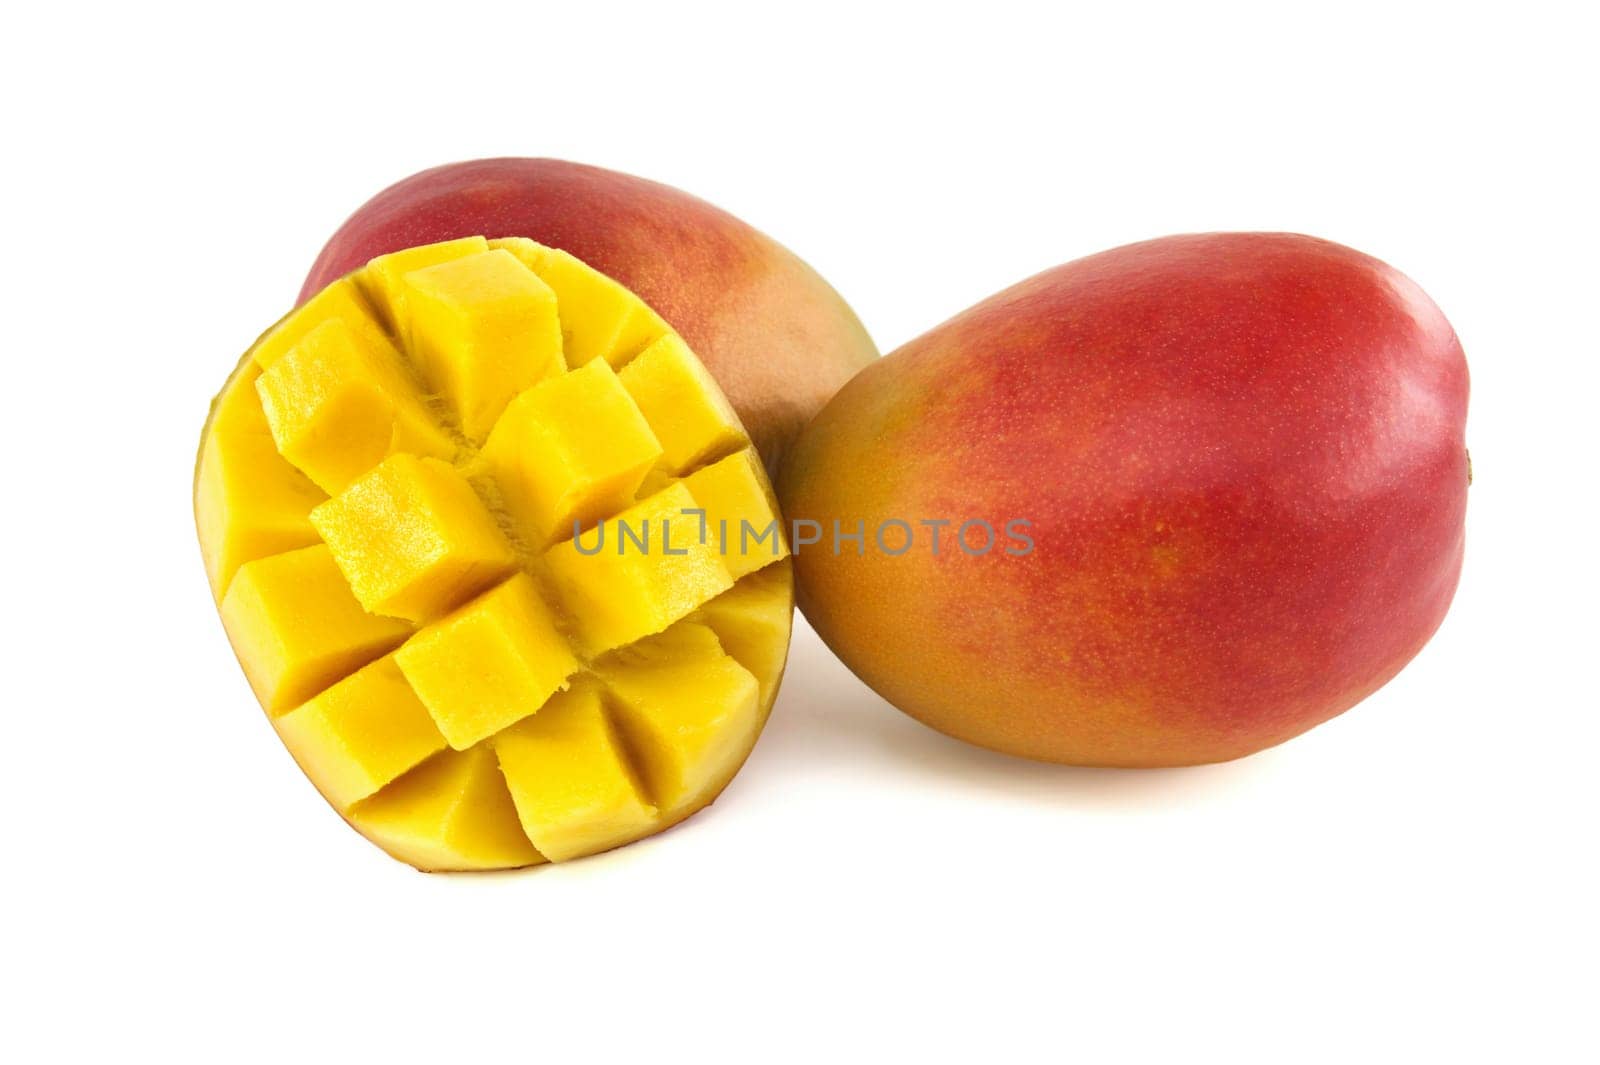 Ripe mango with crimson and yellow skin close to sliced half of a mango with cubed meat